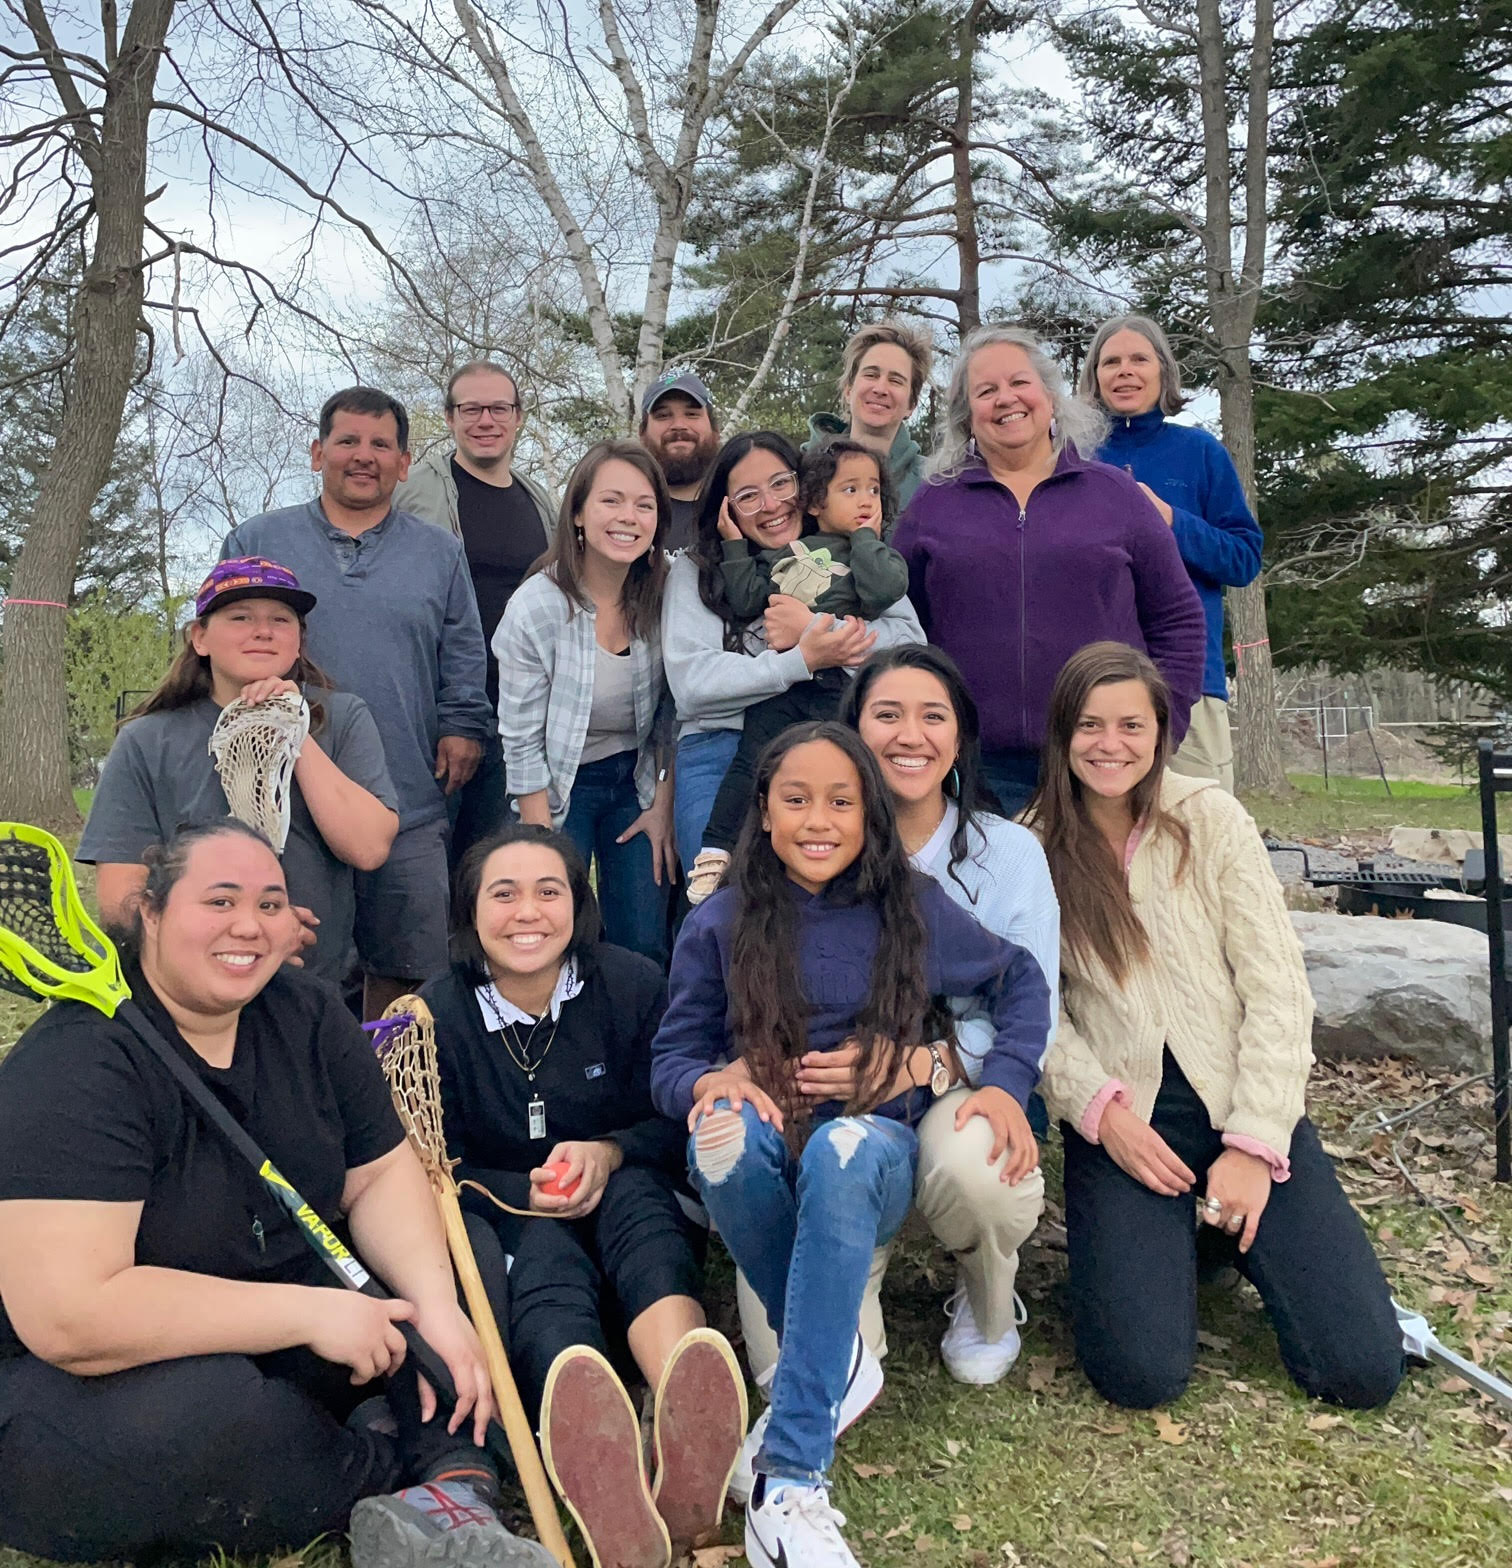 Group image of sloan indigenous graduate fellows and faculty and staff at a picnic